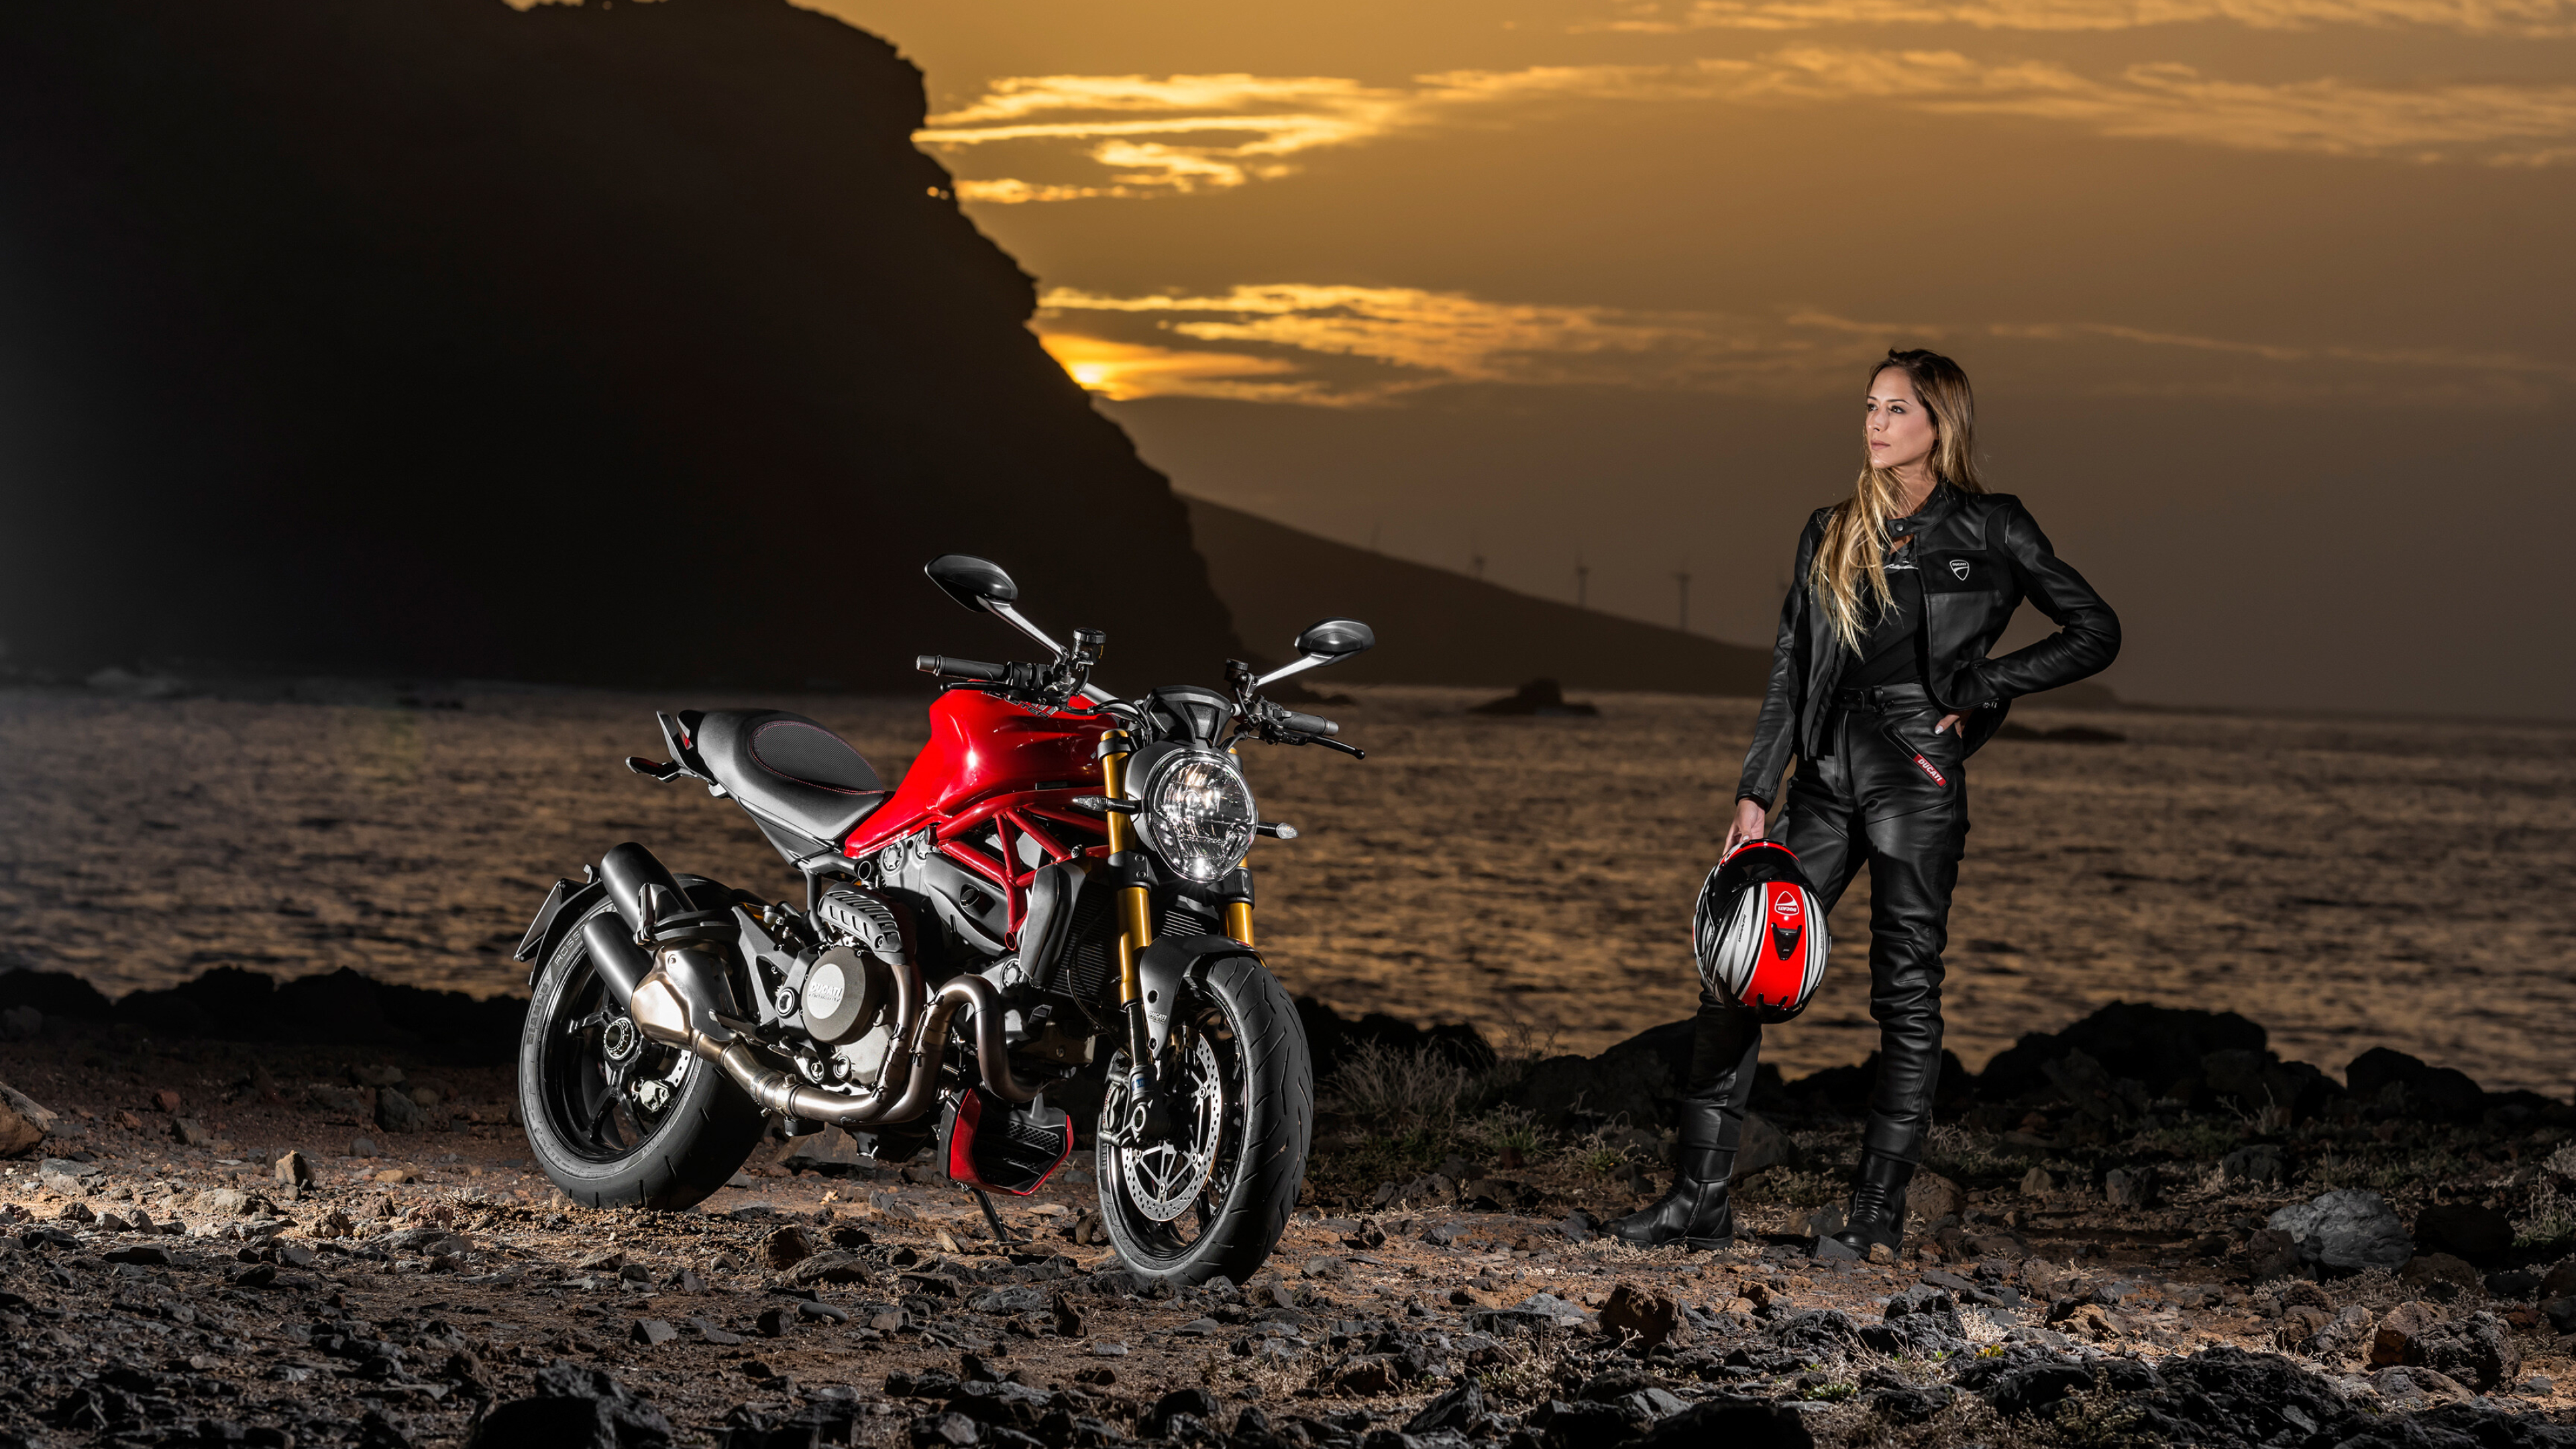 Girls and Motorcycles: Female rider, Going on long rides, Set of biker leathers, Sunset, Riding to the sea. 3840x2160 4K Background.